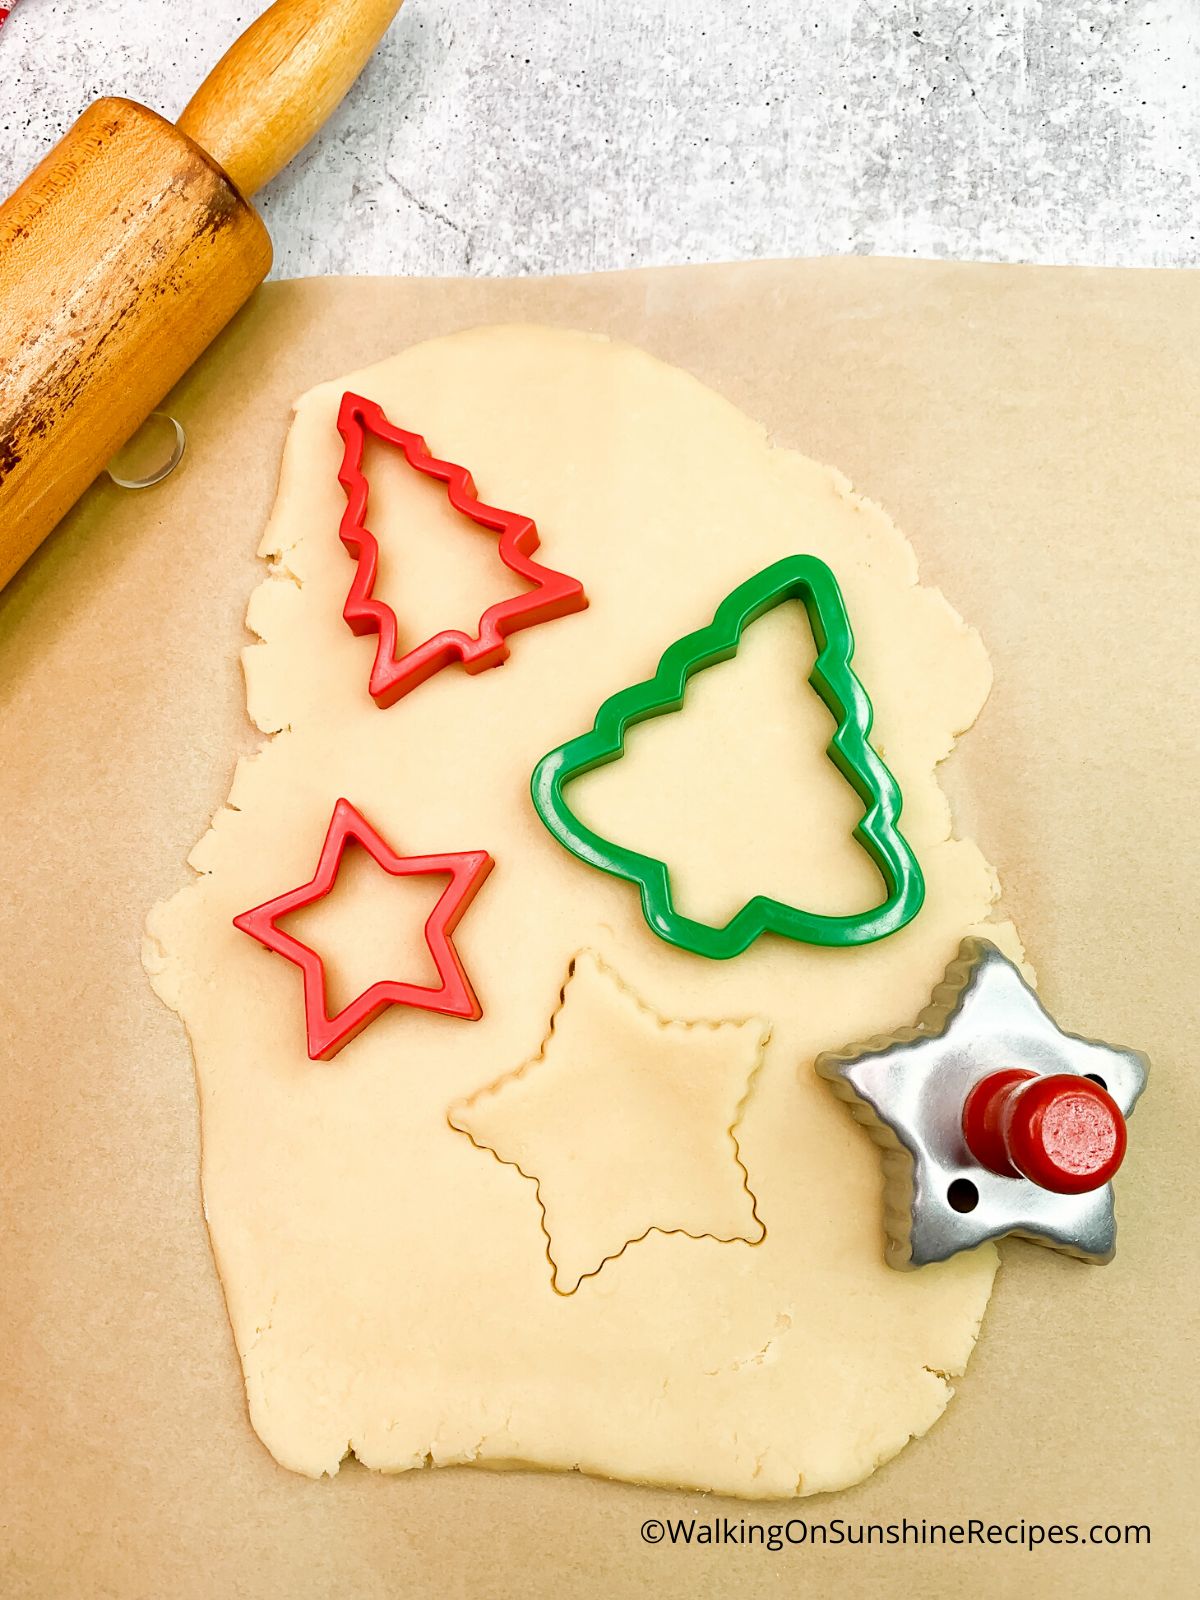 cut out cookies using cookie cutters.